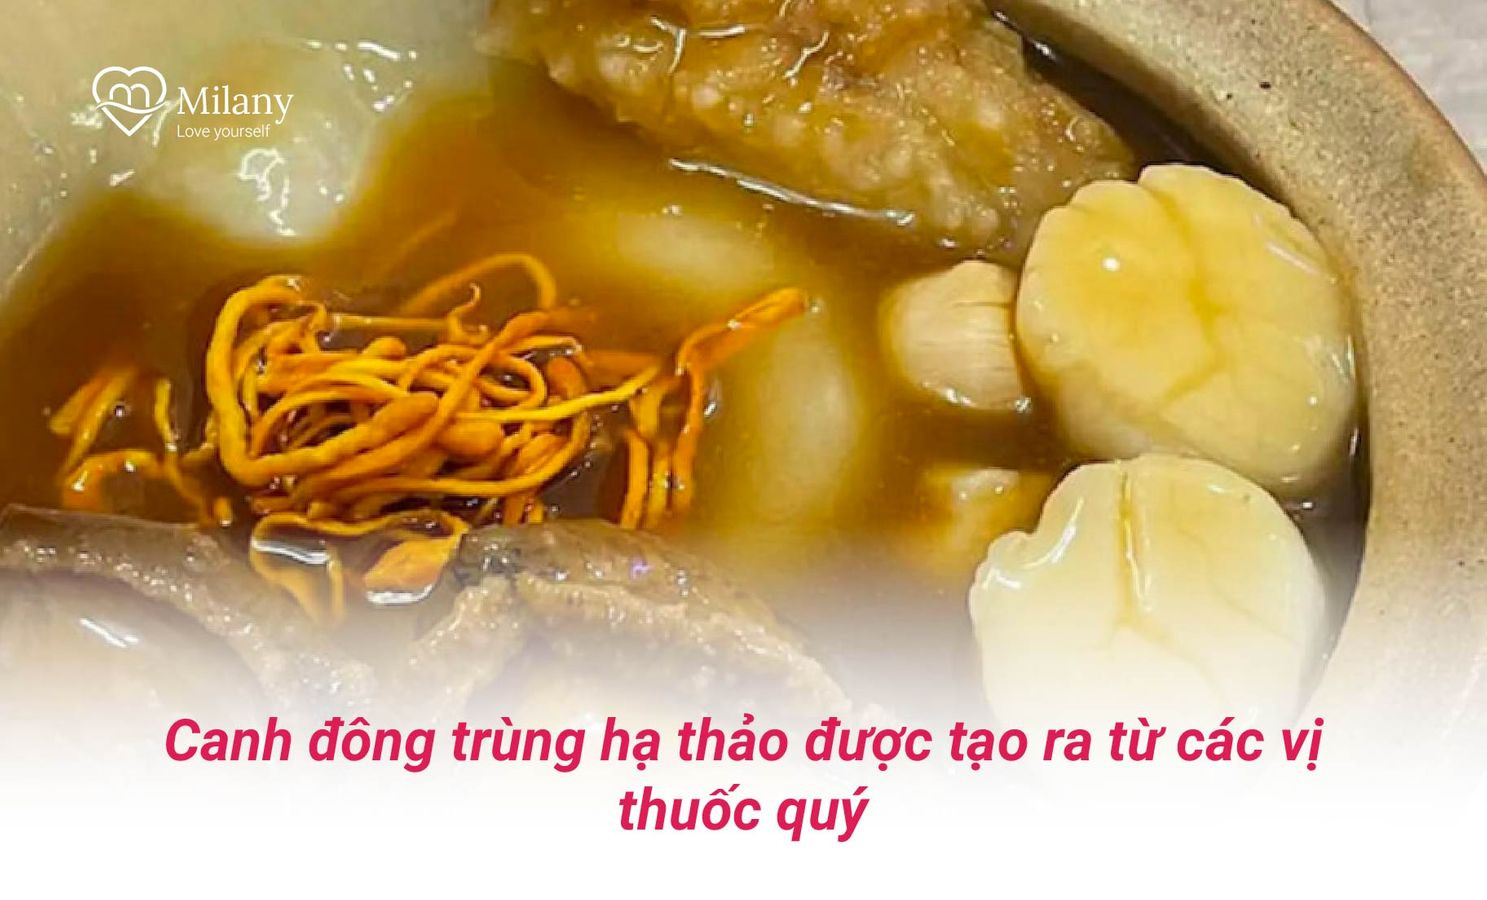 canh dong trung ha thao duoc tao ra tu cac vi thuoc quy